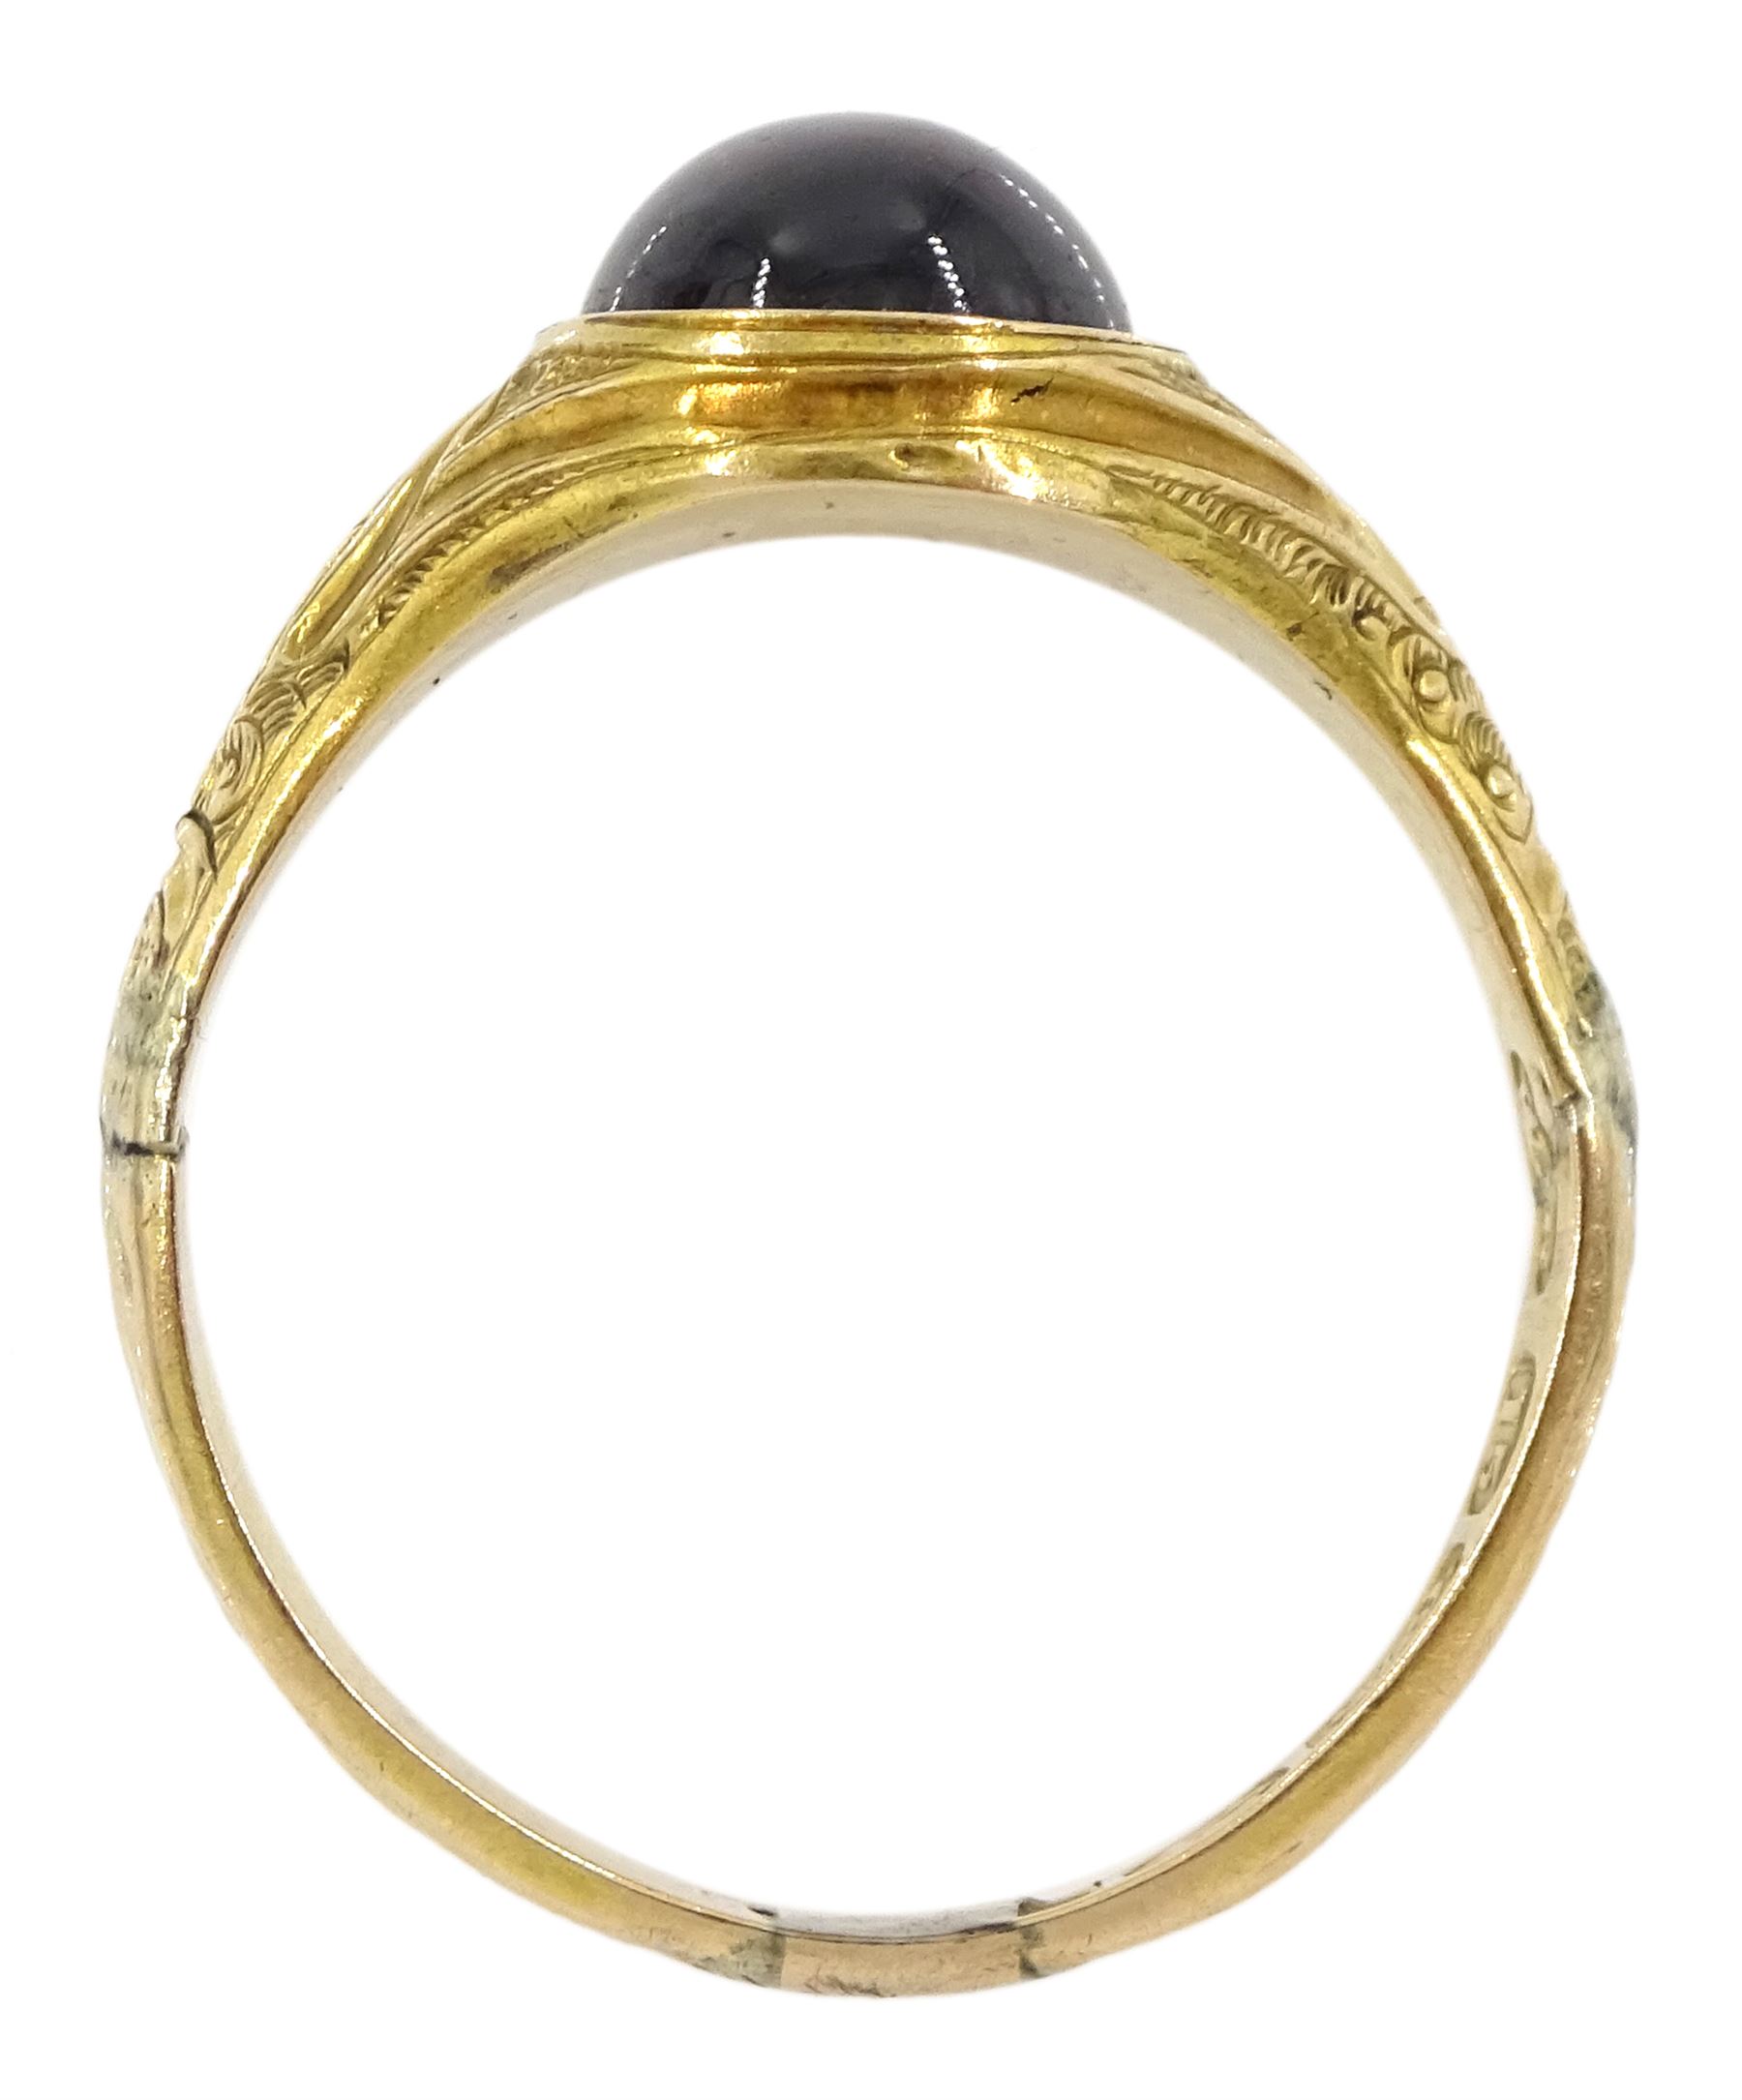 Victorian 15ct gold single stone cabochon garnet ring - Image 4 of 4